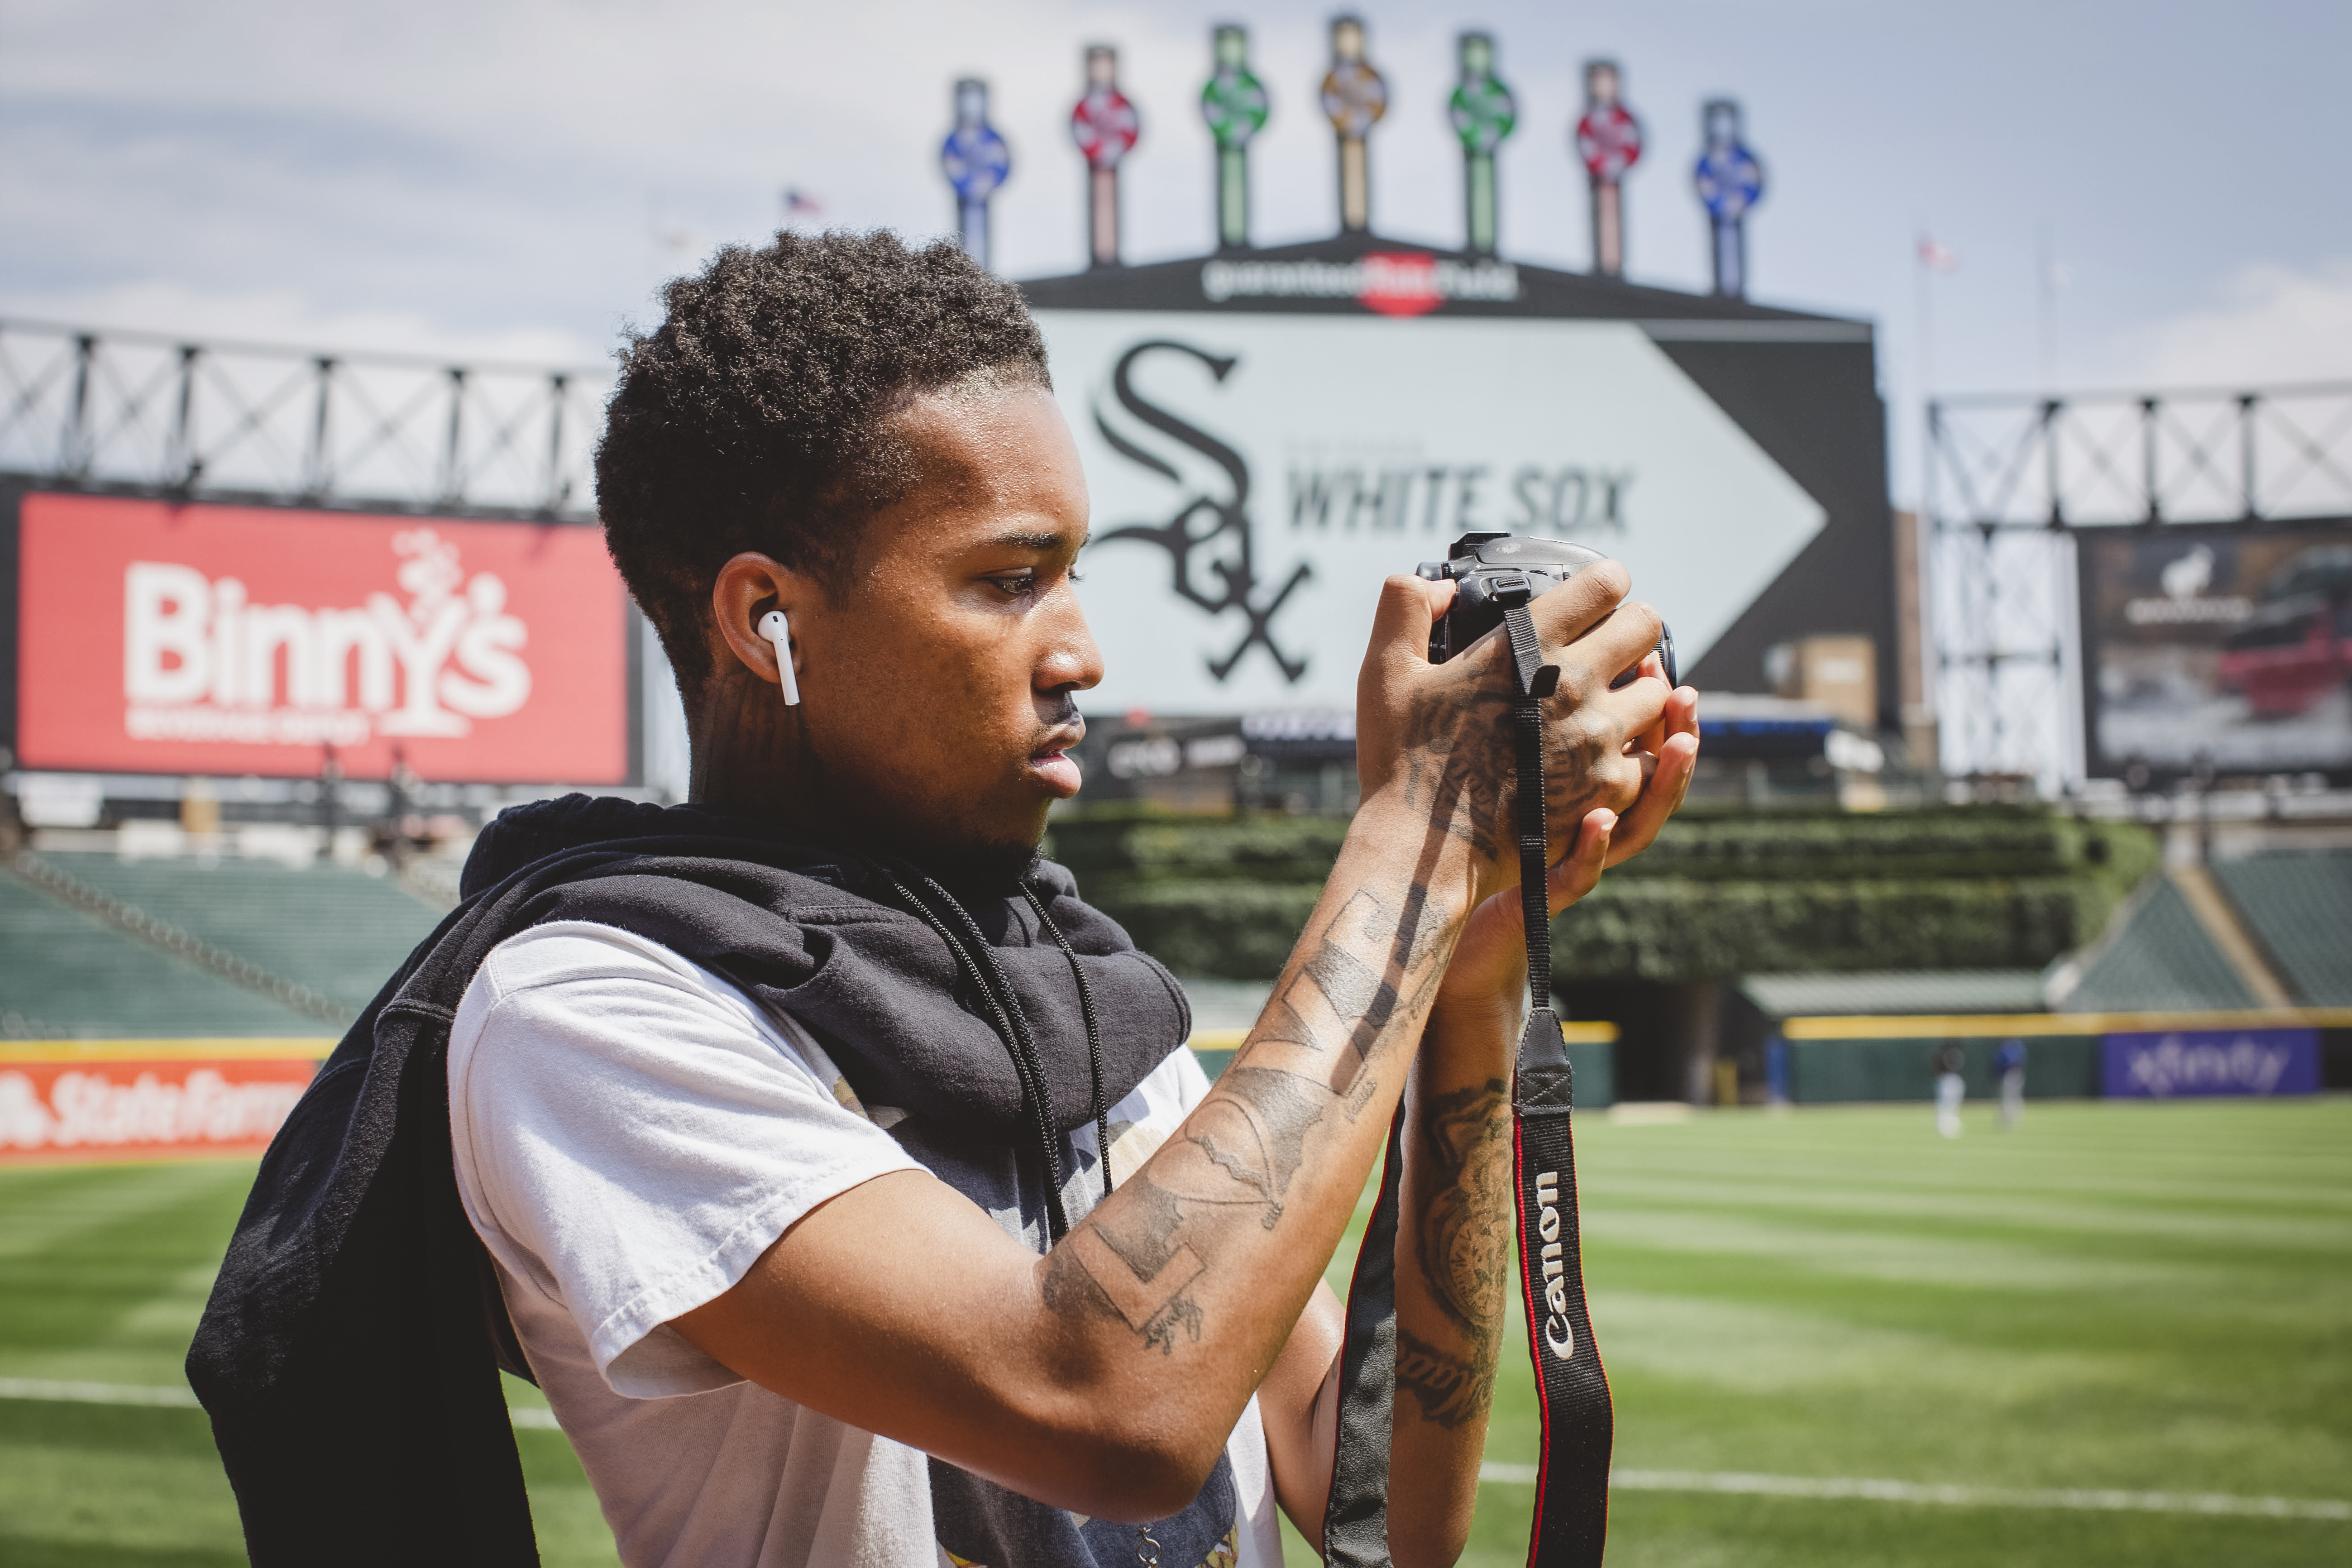 Young photographer holds camera with baseball field in background